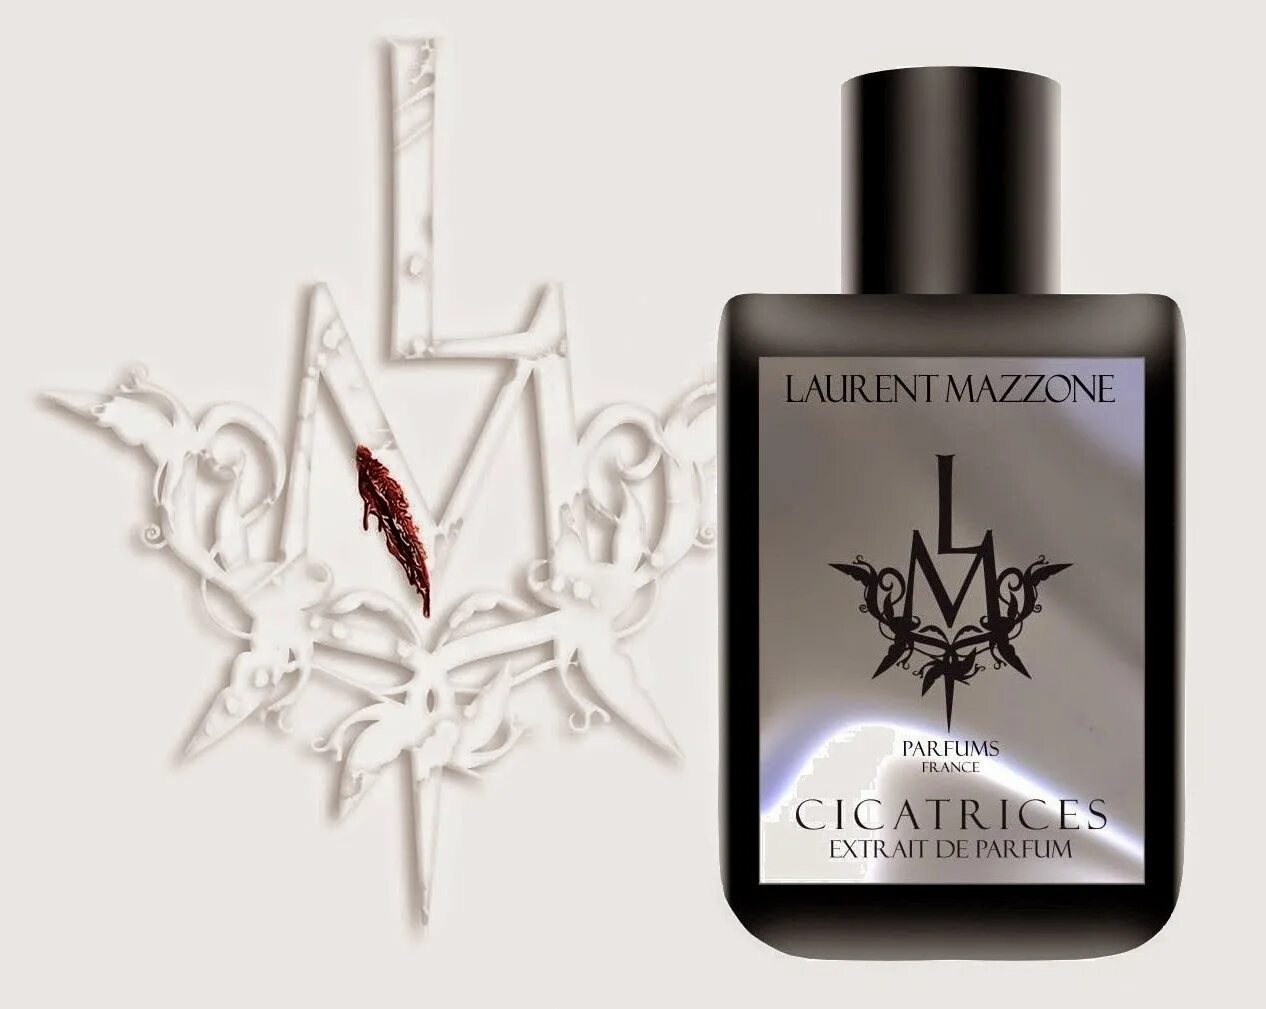 Dulce pear laurent. LM cicatrices Парфюм. LM Parfums (Laurent Mazzone Parfums) Dulce Pear. Laurent Mazzone духи. Sensual Orchid Laurent Mazzone Parfums.